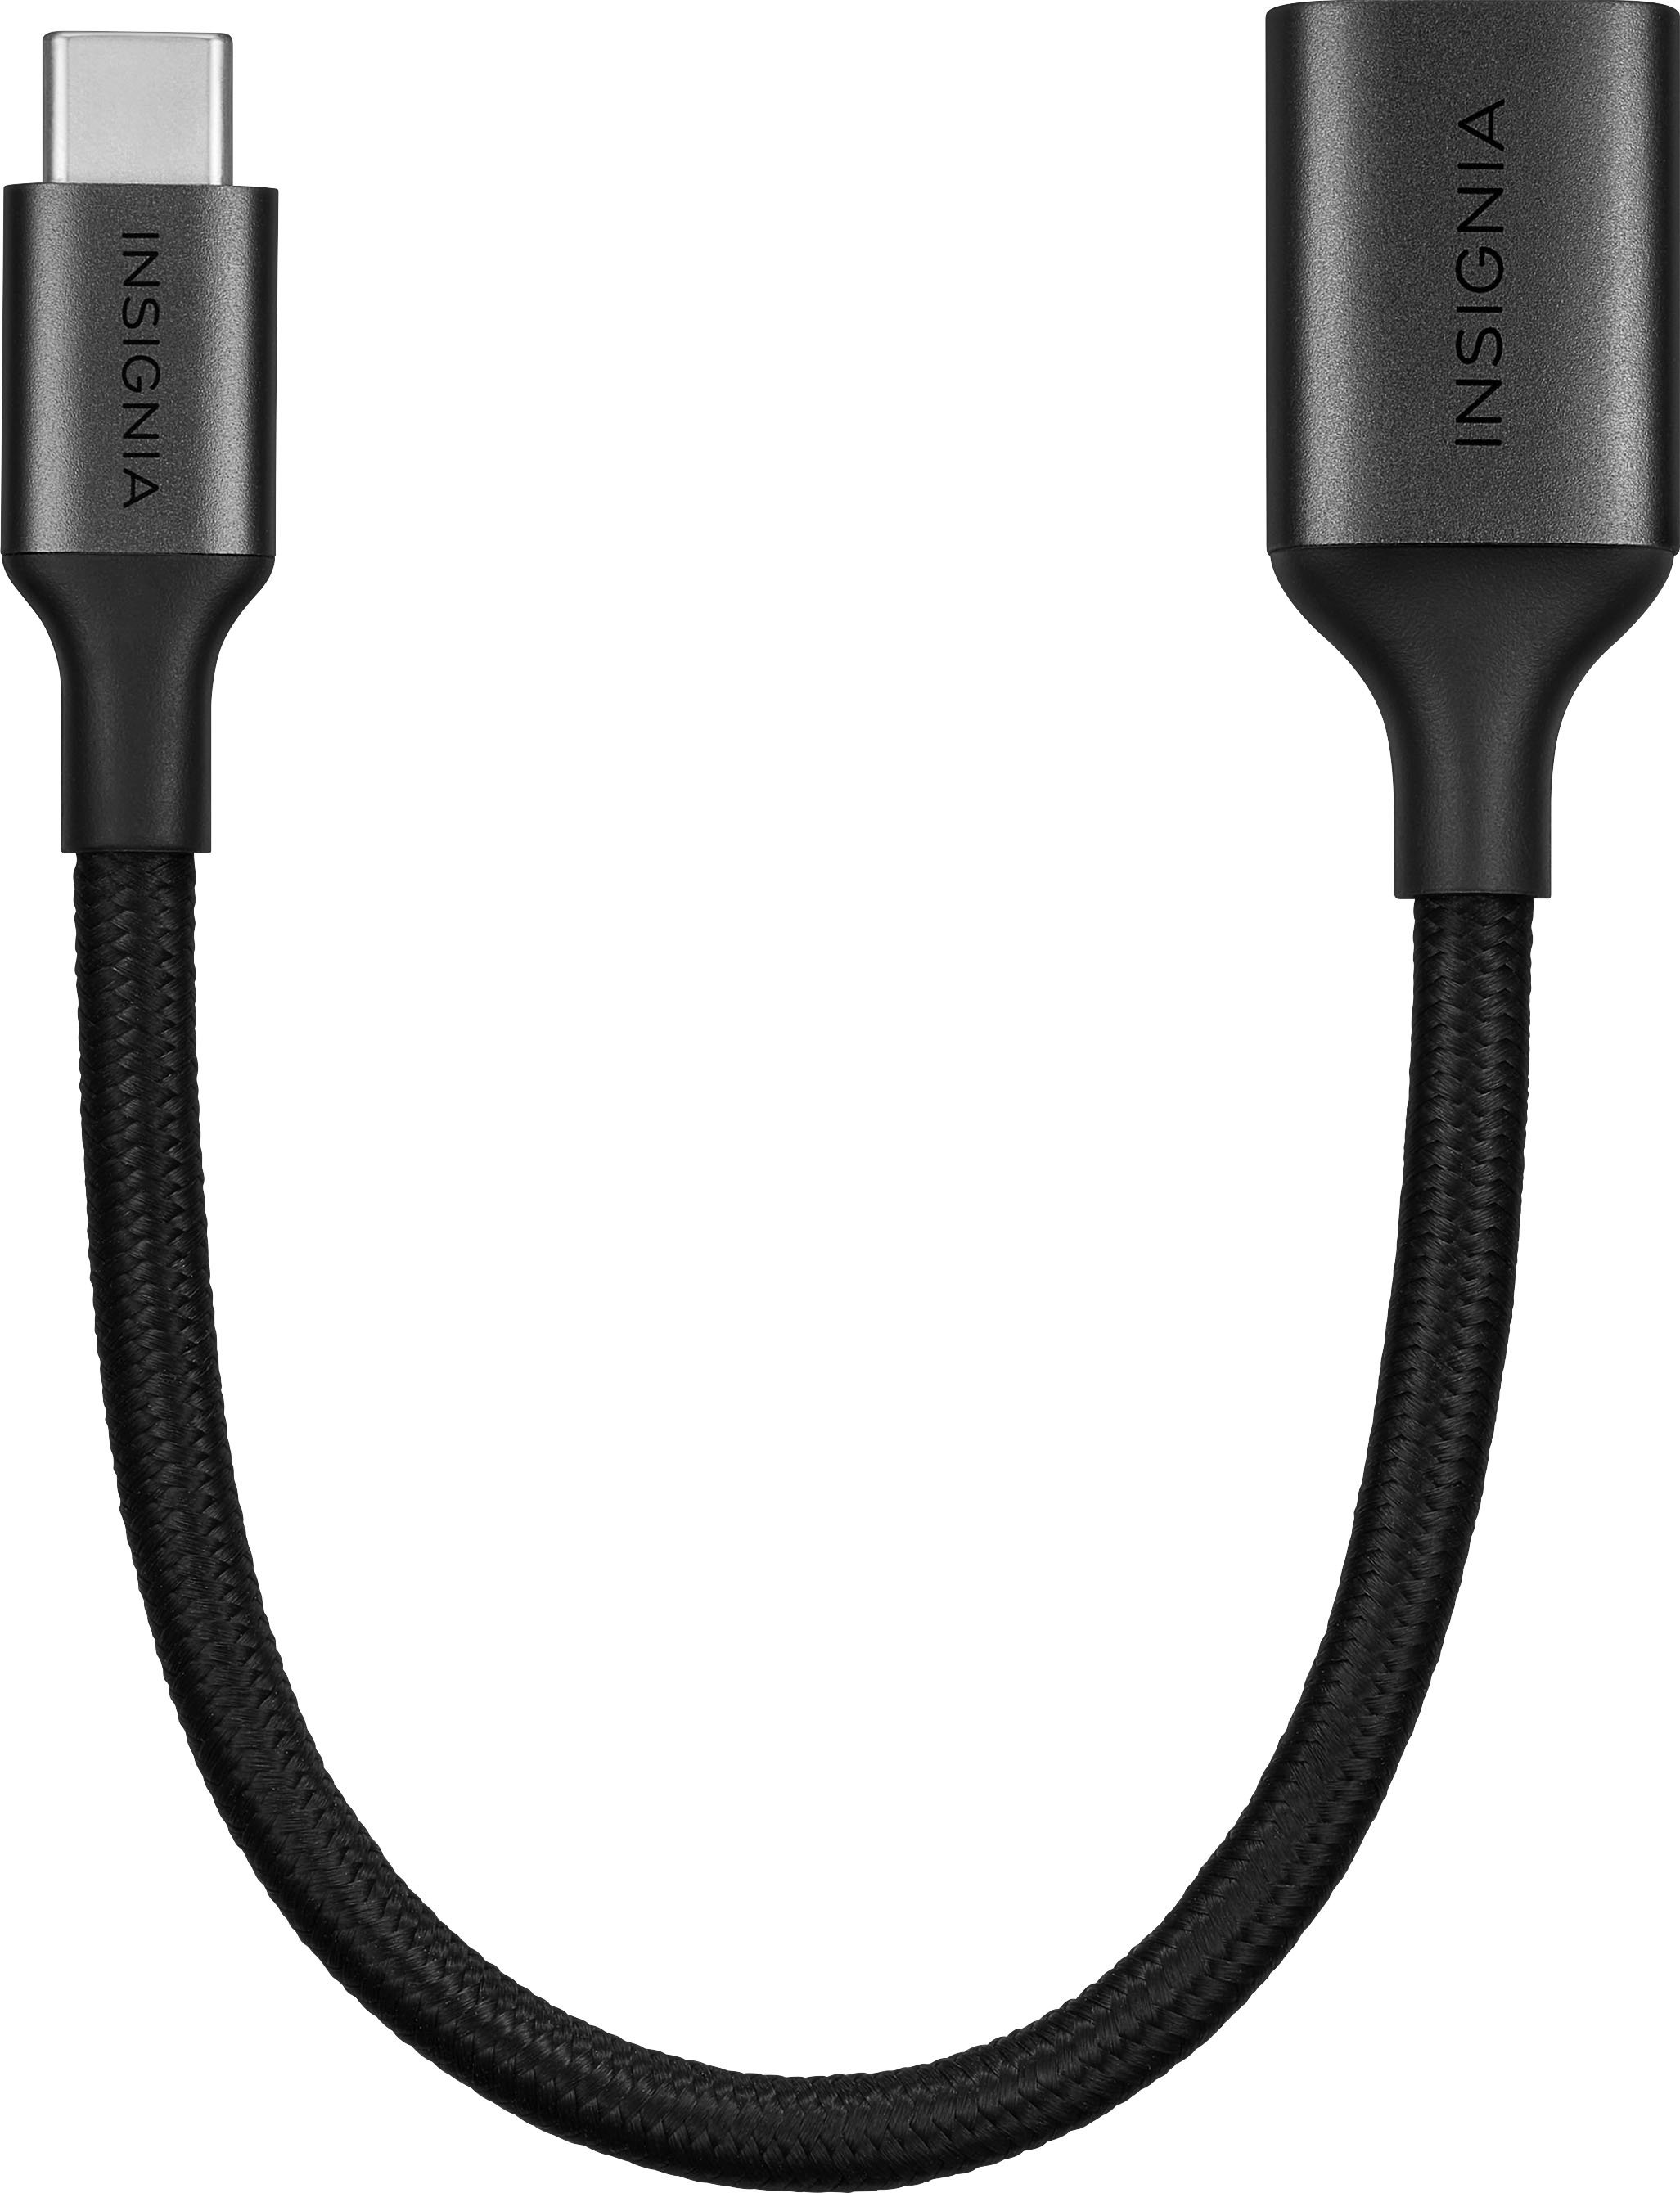 Left View: Belkin - 3.1 USB-A to USB-C Cable - 3ft USB Type A to Type C Cable for Fast Charging & Data Transfer - Black